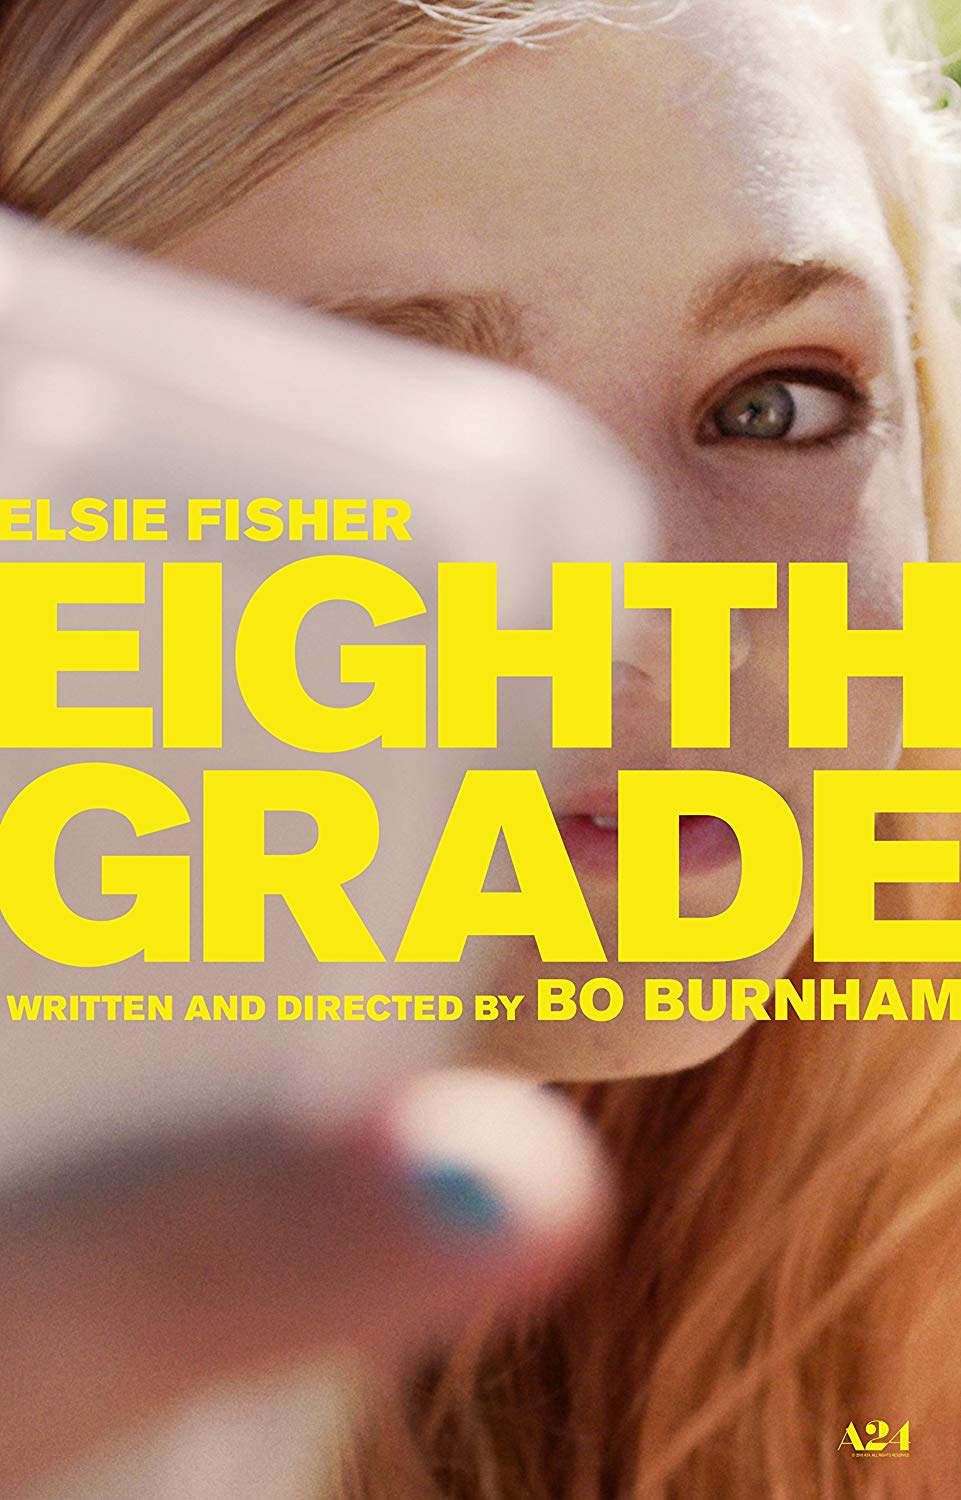 Eighth Grade Cover